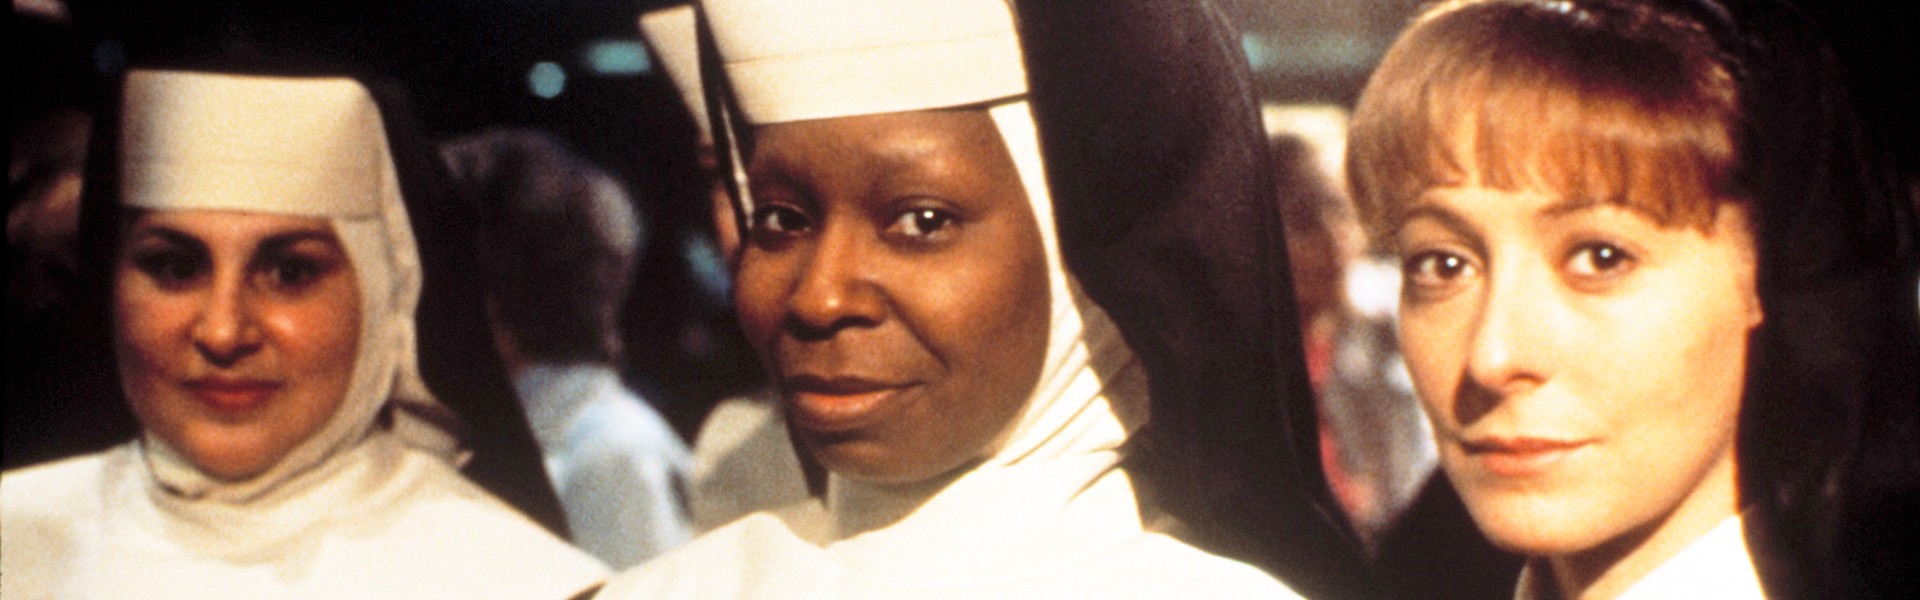 Will a Nun in Disguise” make it to the Vatican? Whoopi Goldberg on work for the 3rd installment